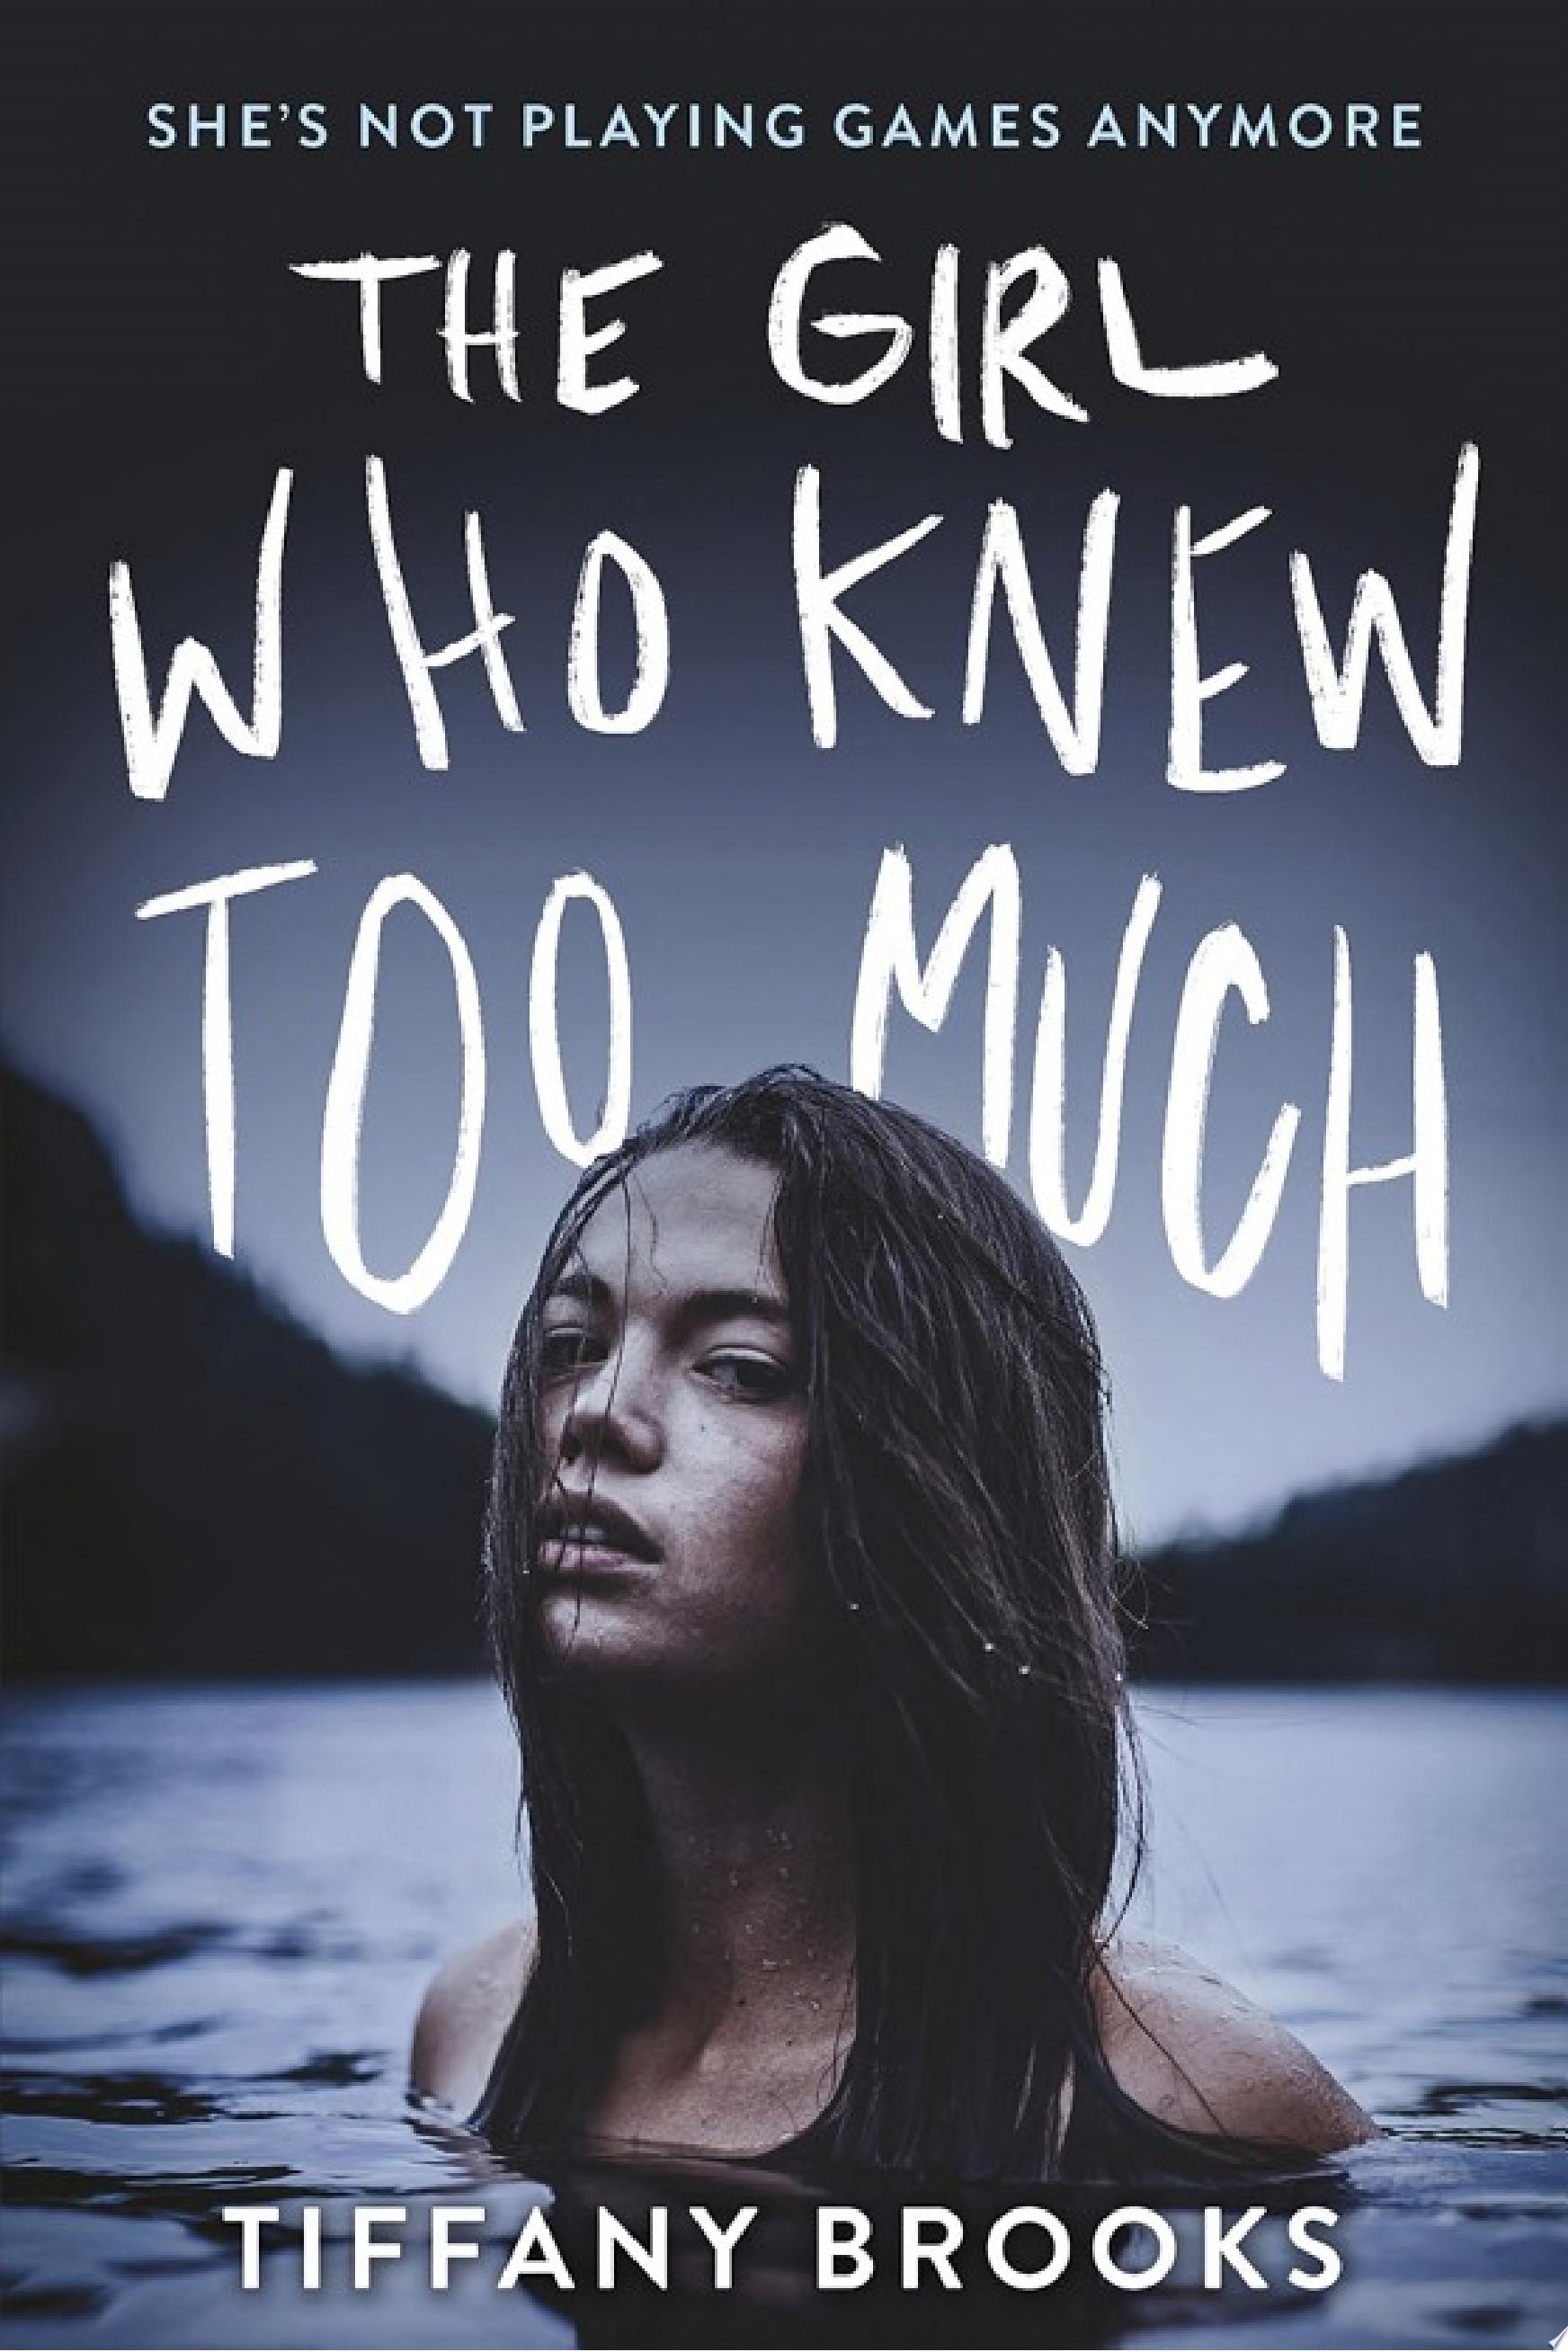 Image for "The Girl Who Knew Too Much"